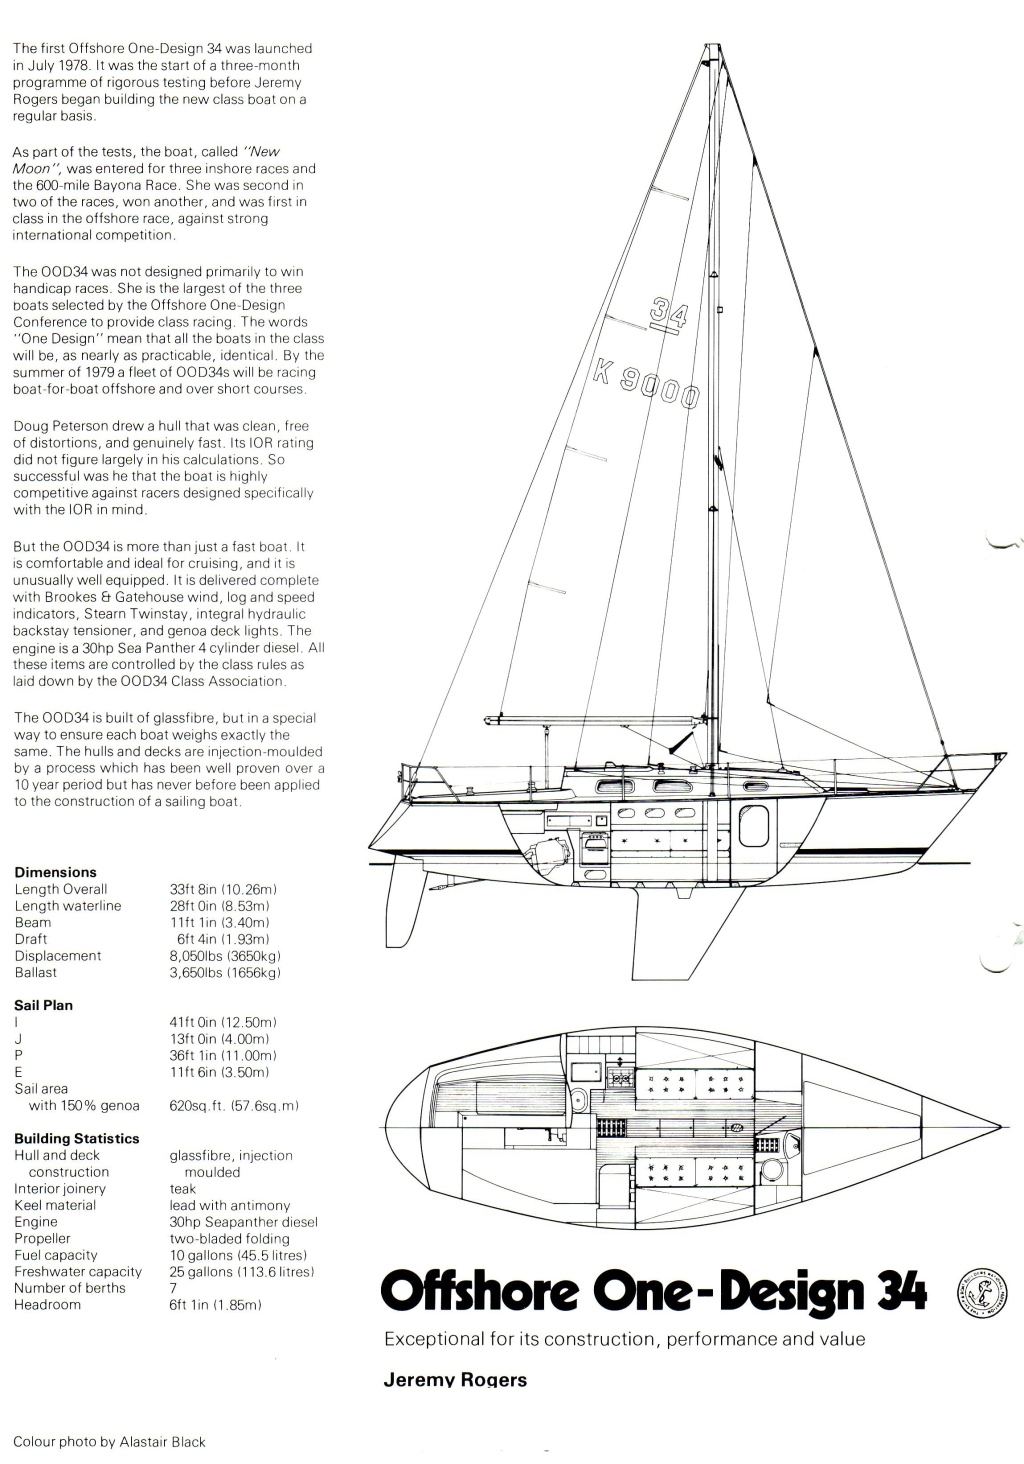 Original sailpan and specification